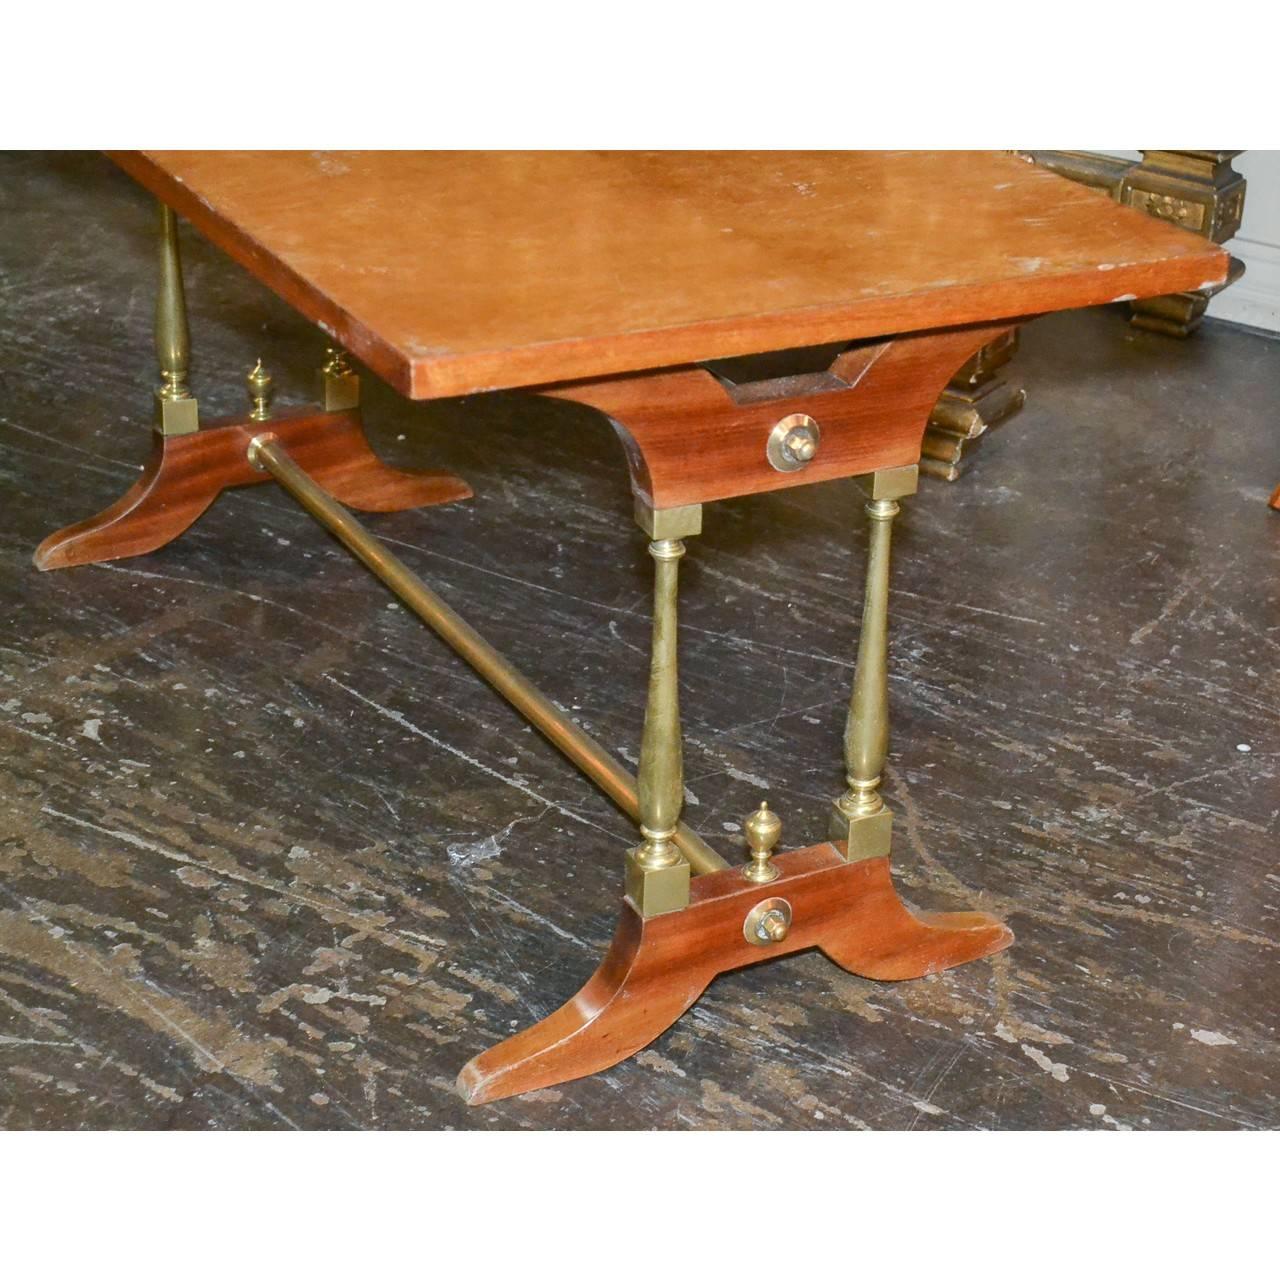 1960s French neoclassical style mahogany, maple and brass coffee table.